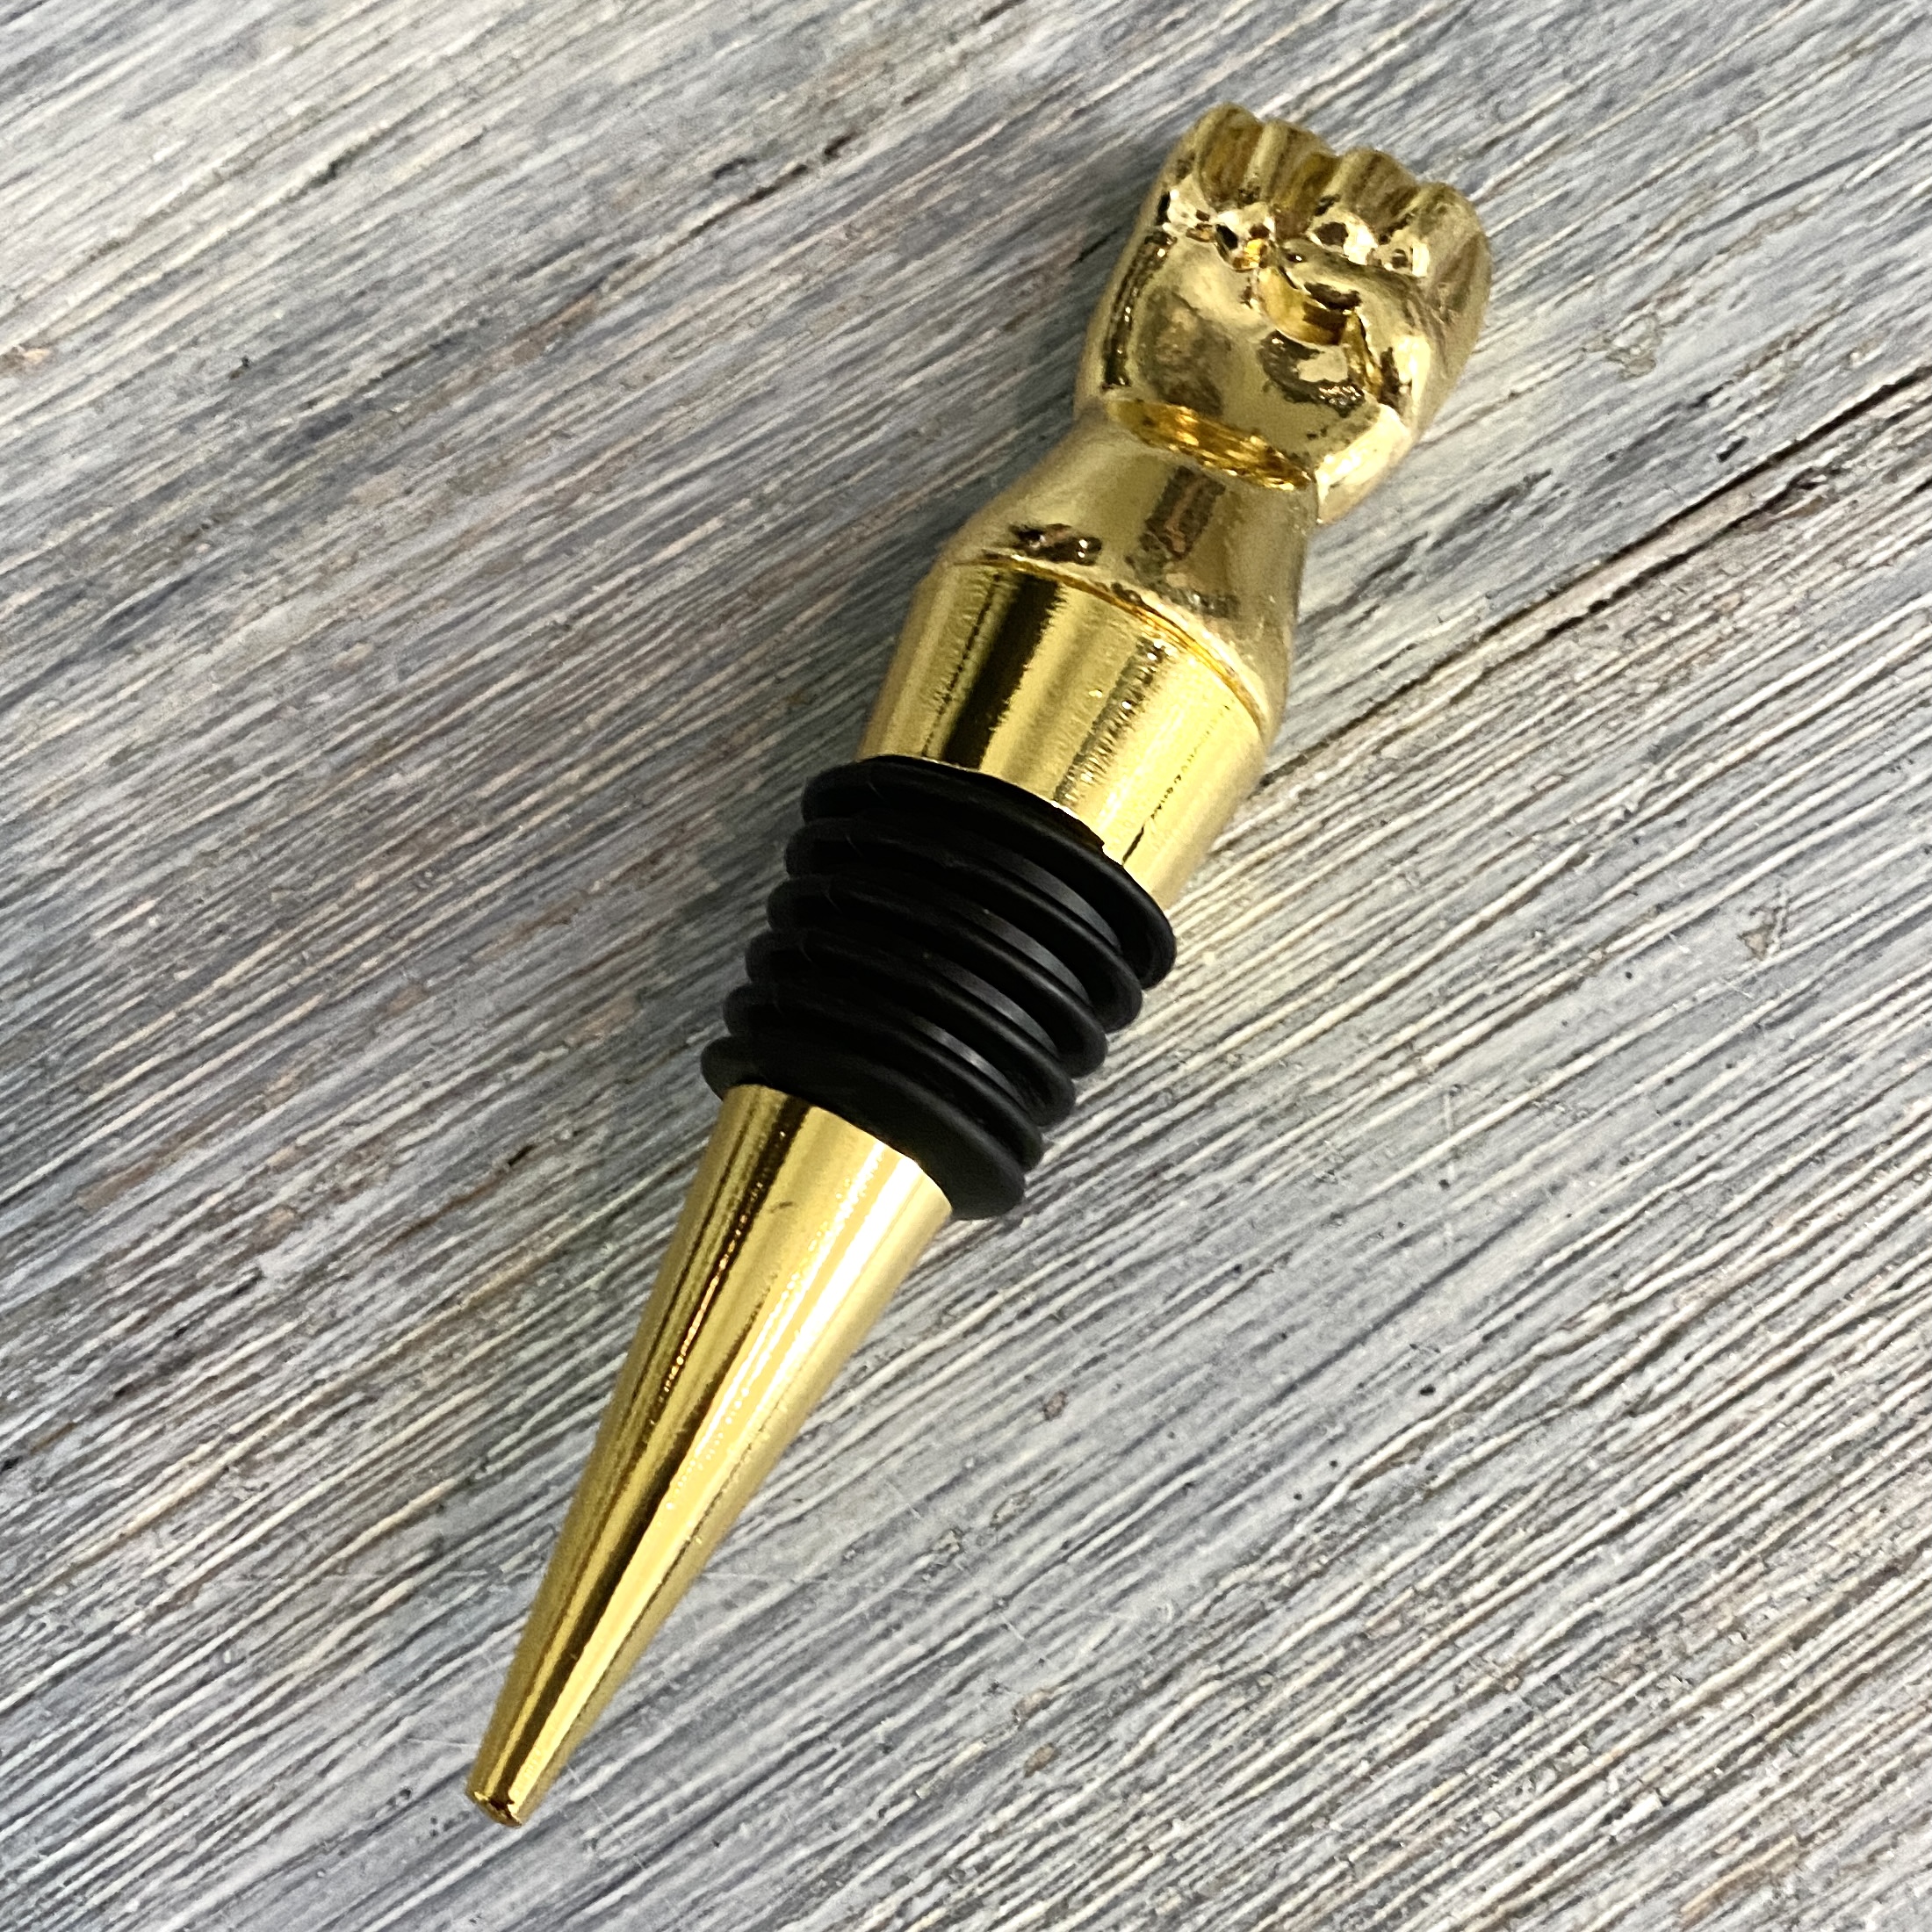 Wine Stopper for Brown Sugar Box October 2021